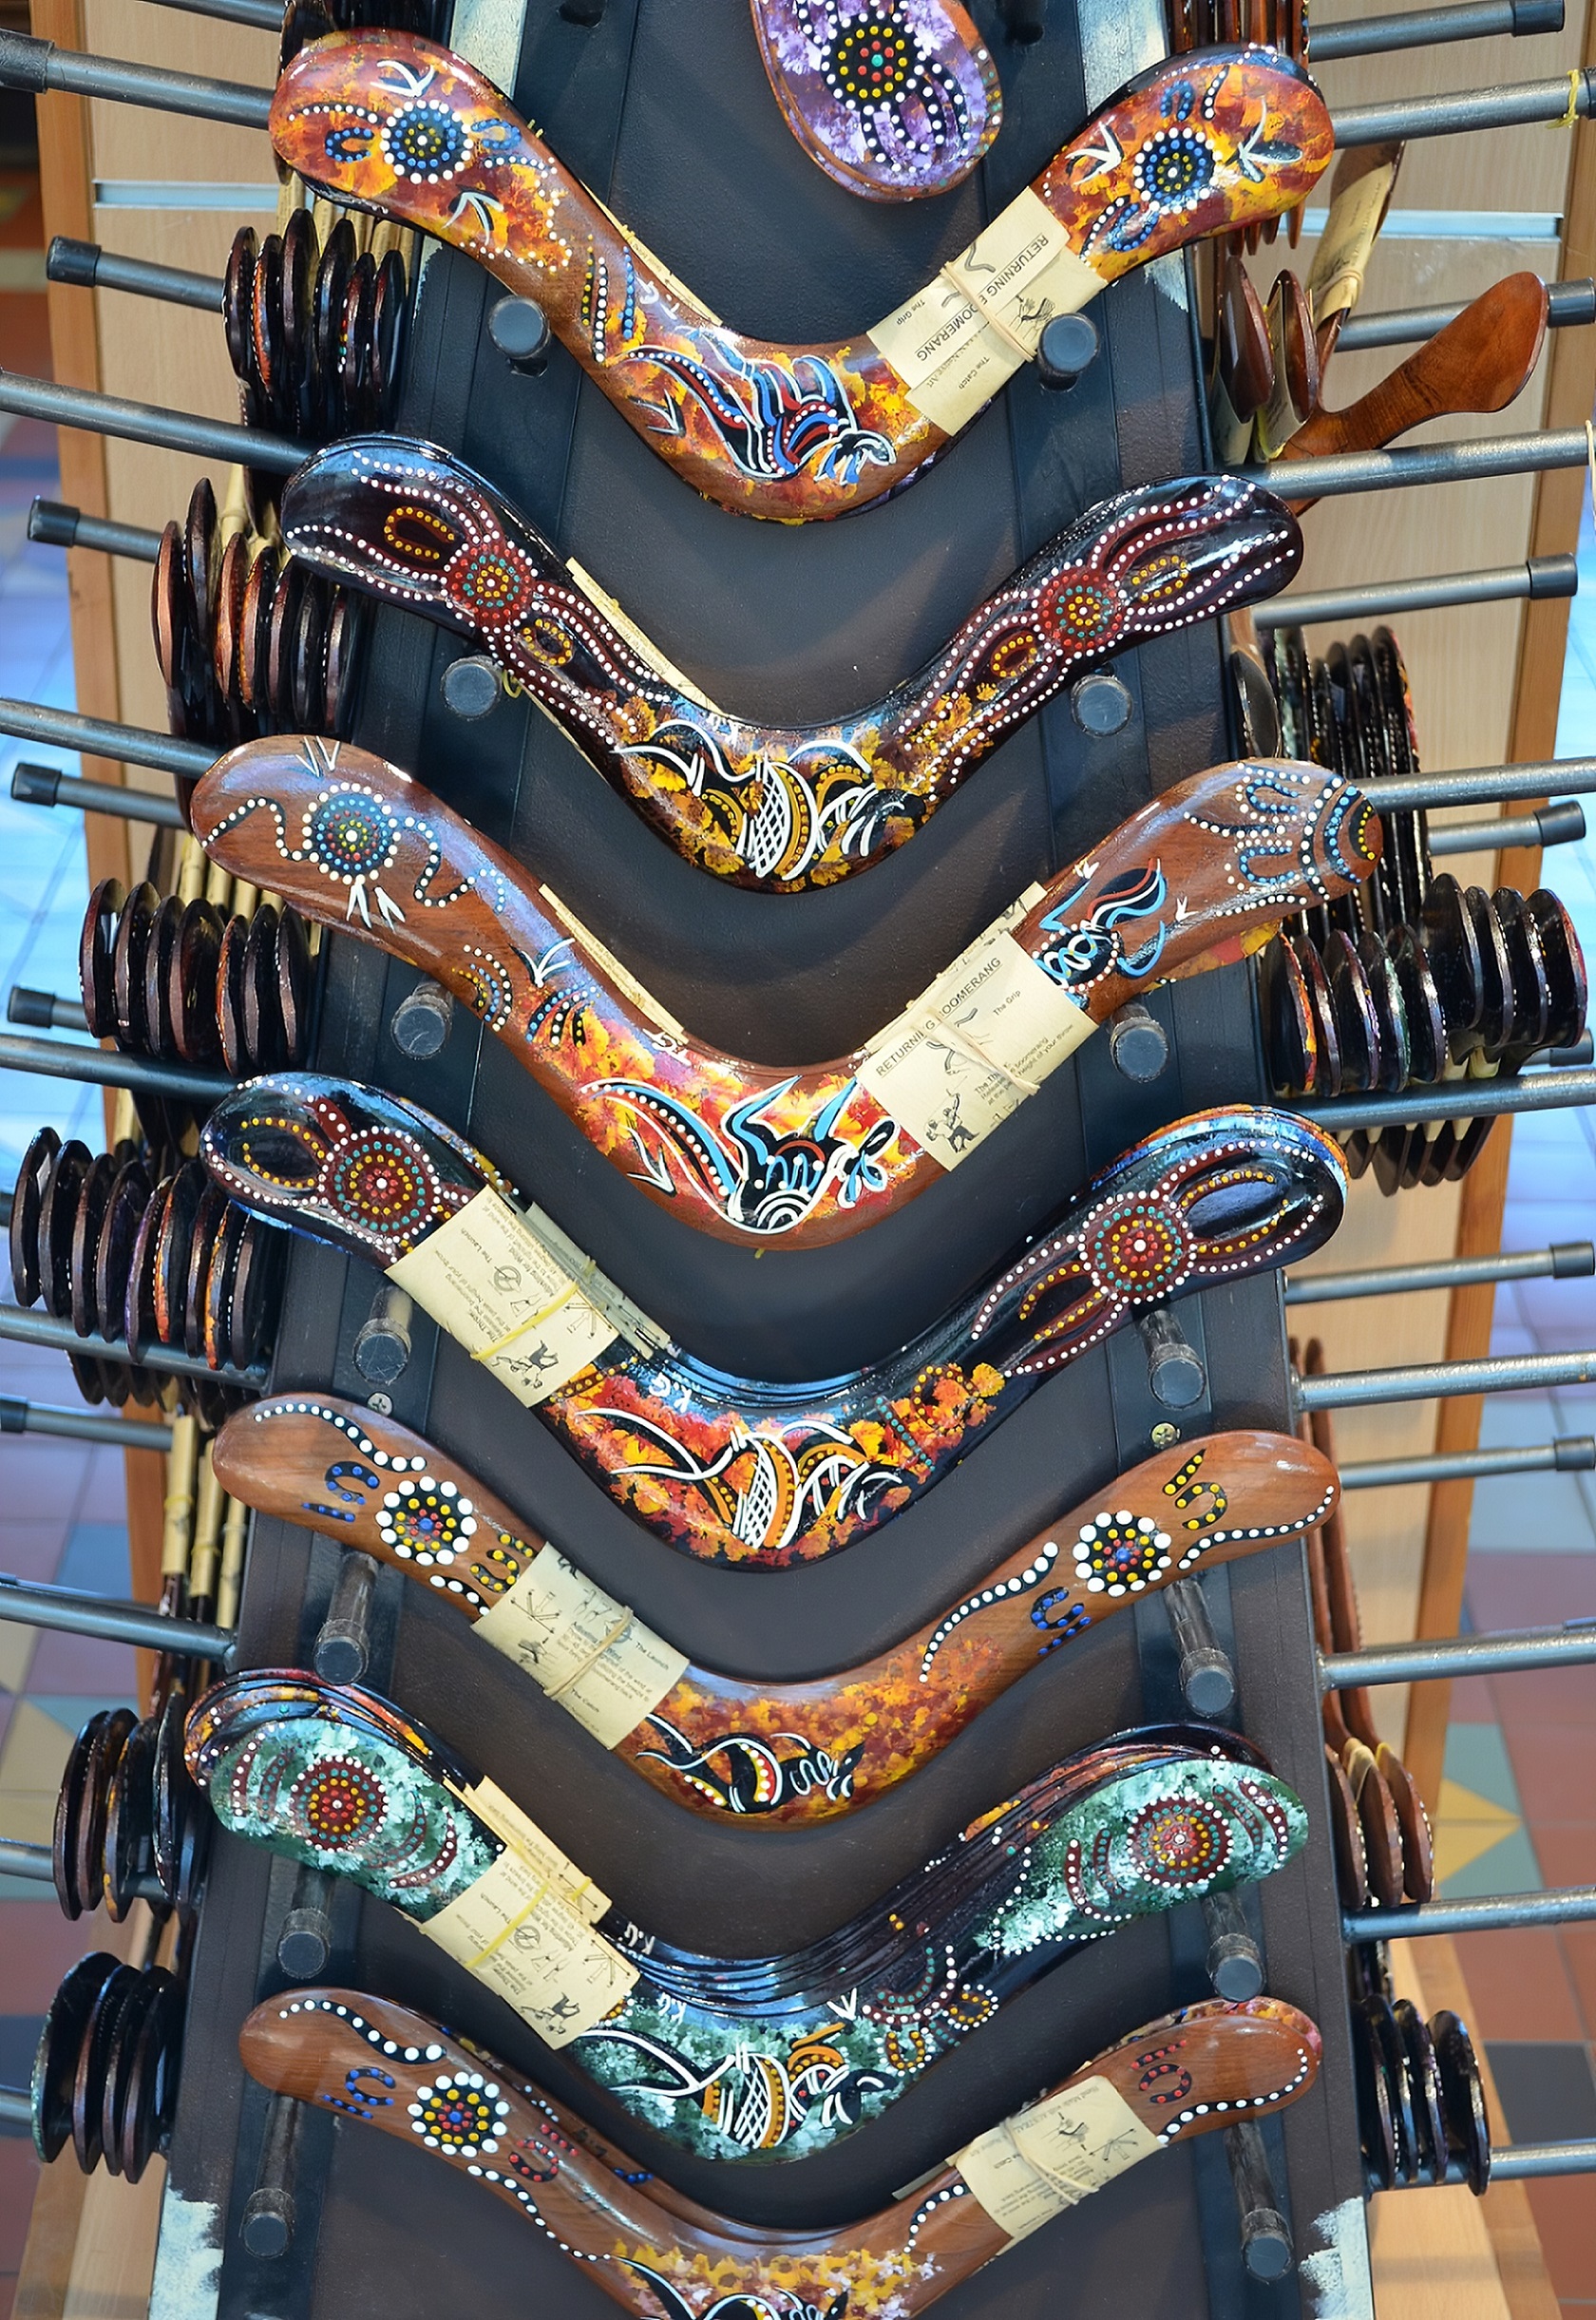 Boomerangs in a Tourist Shop at Katoomba, NSW by lonewolf6738